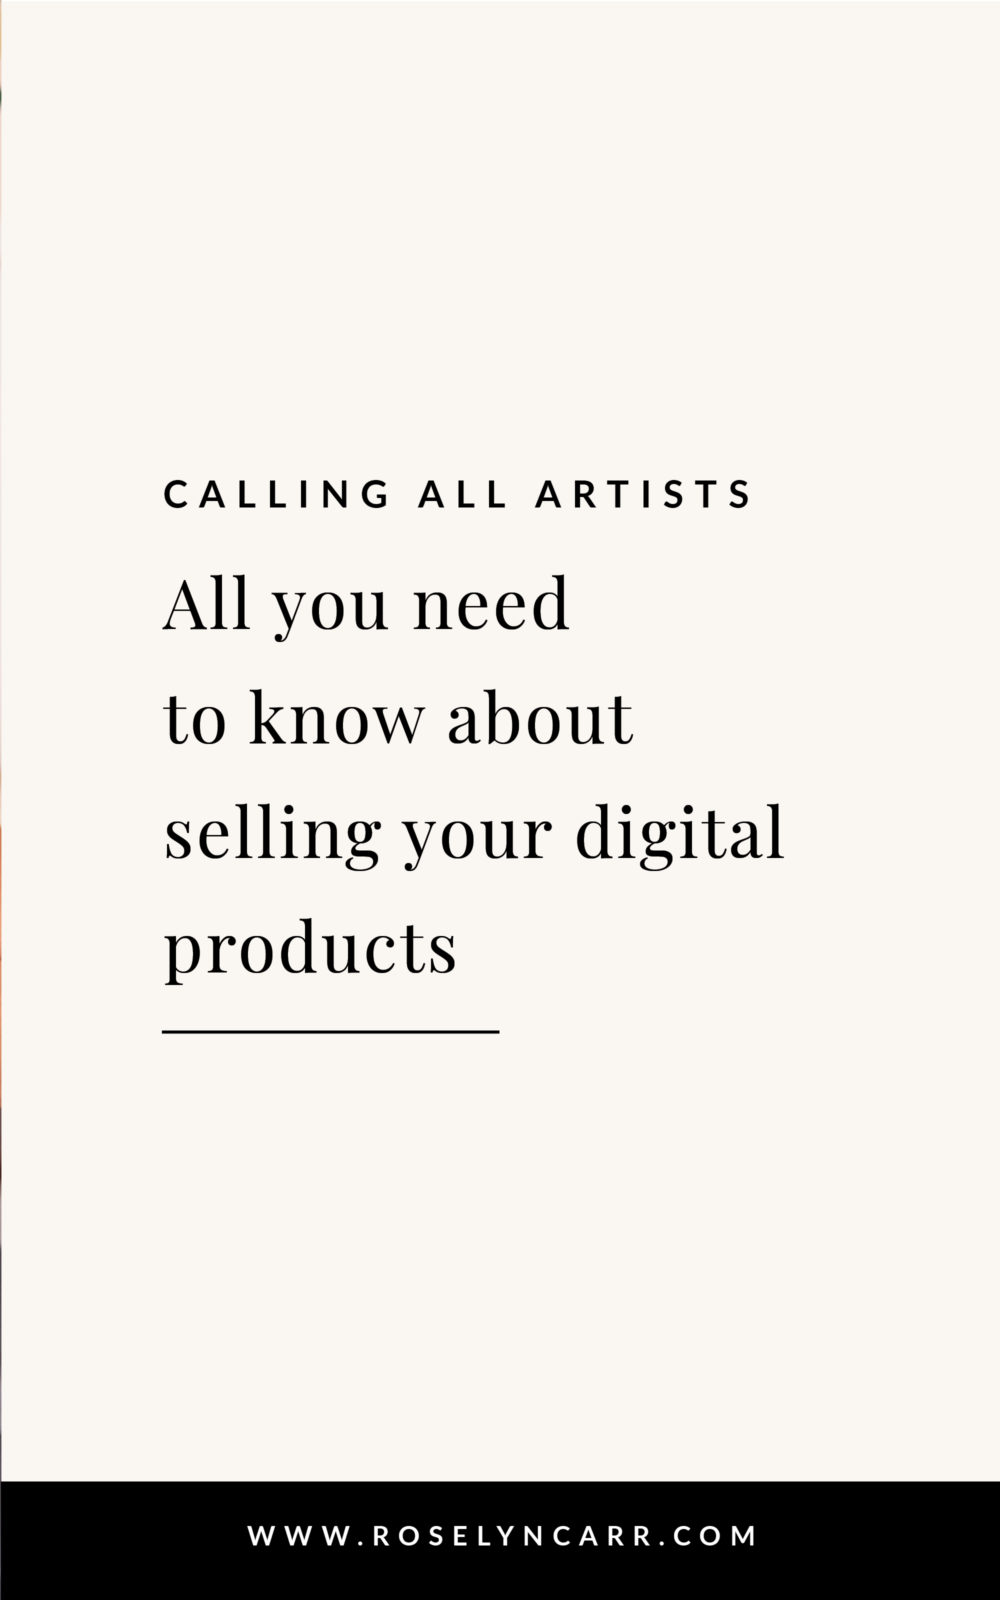 10 things I wish I knew before selling digital products